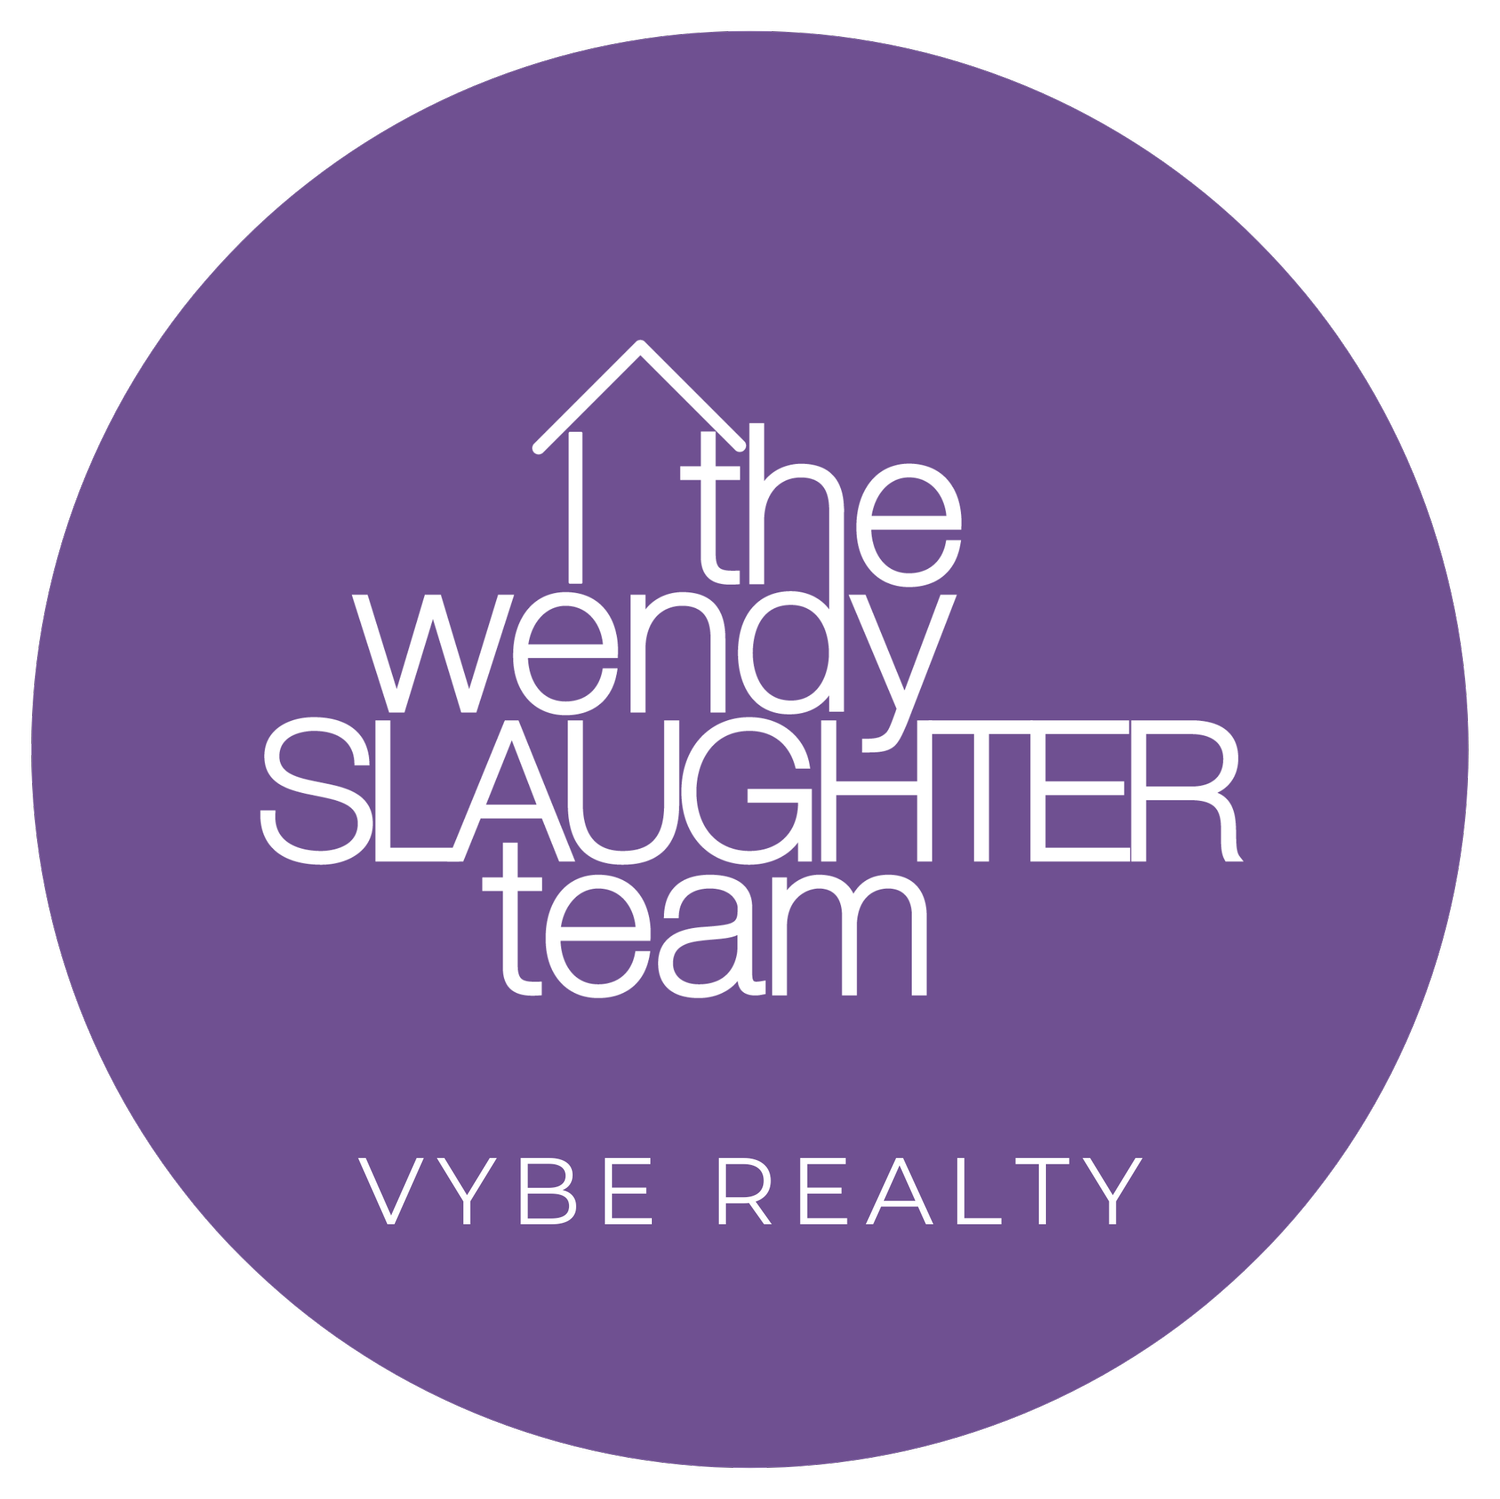 The Wendy Slaughter Team at VYBE Realty